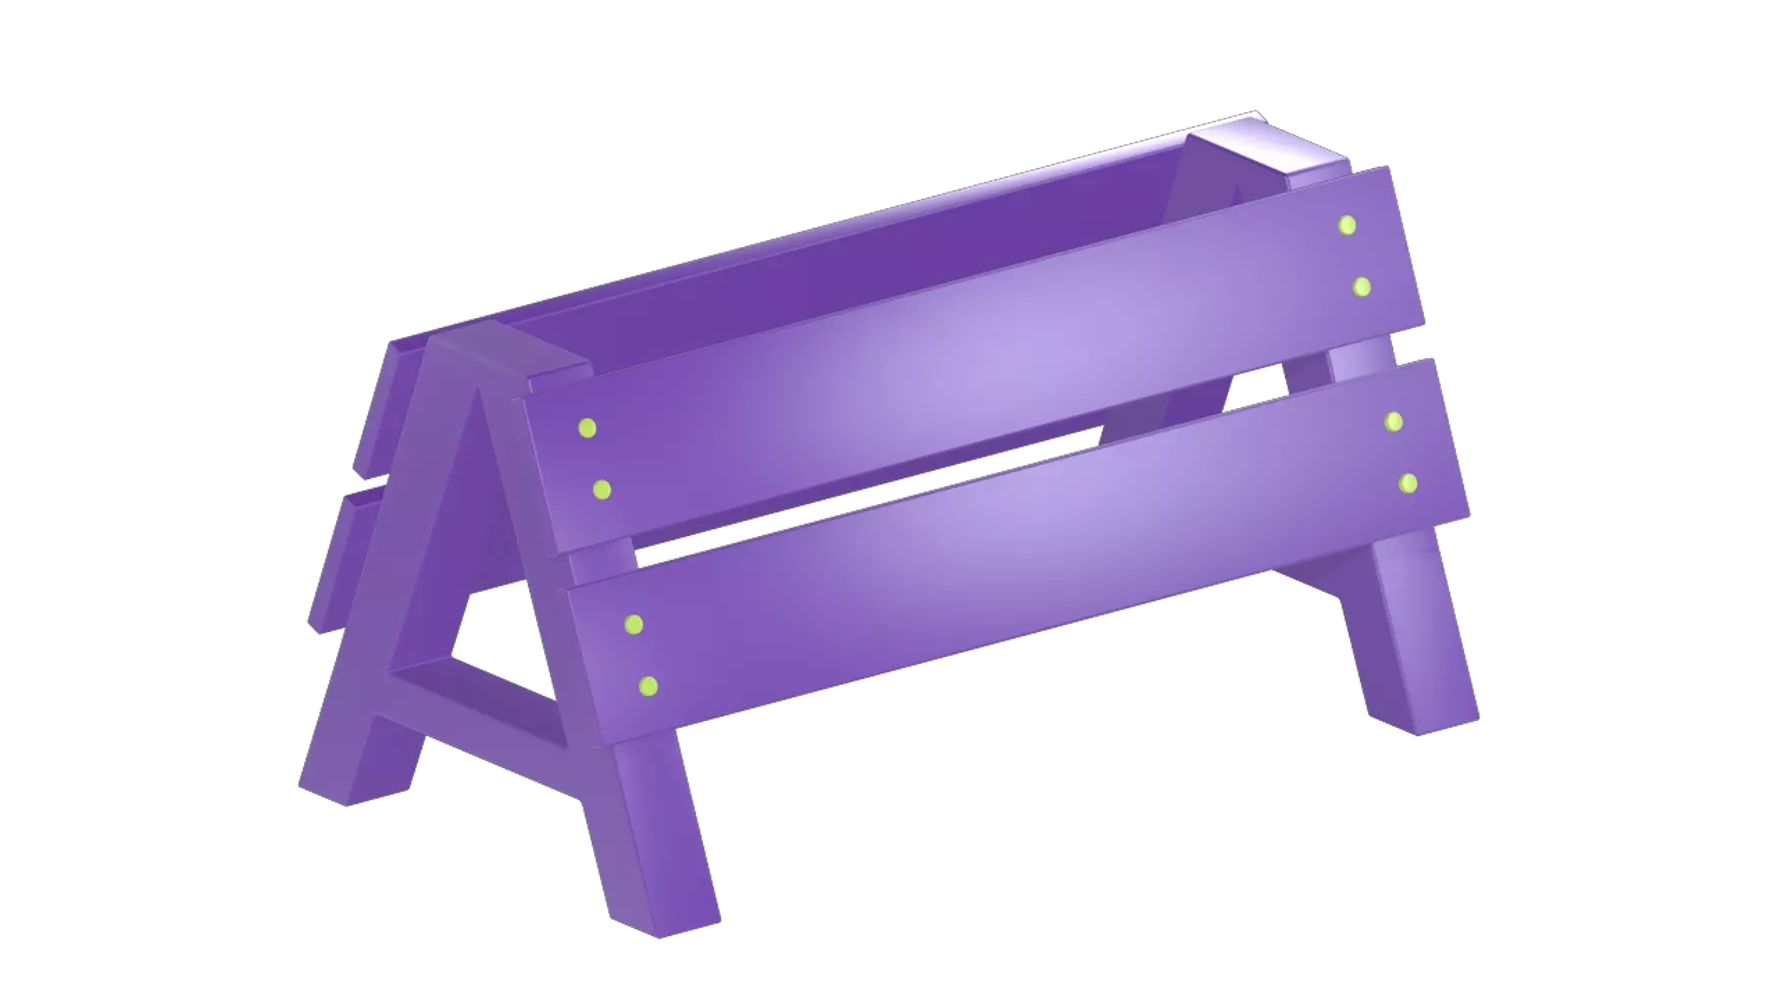 Road Barrier 3D Graphic